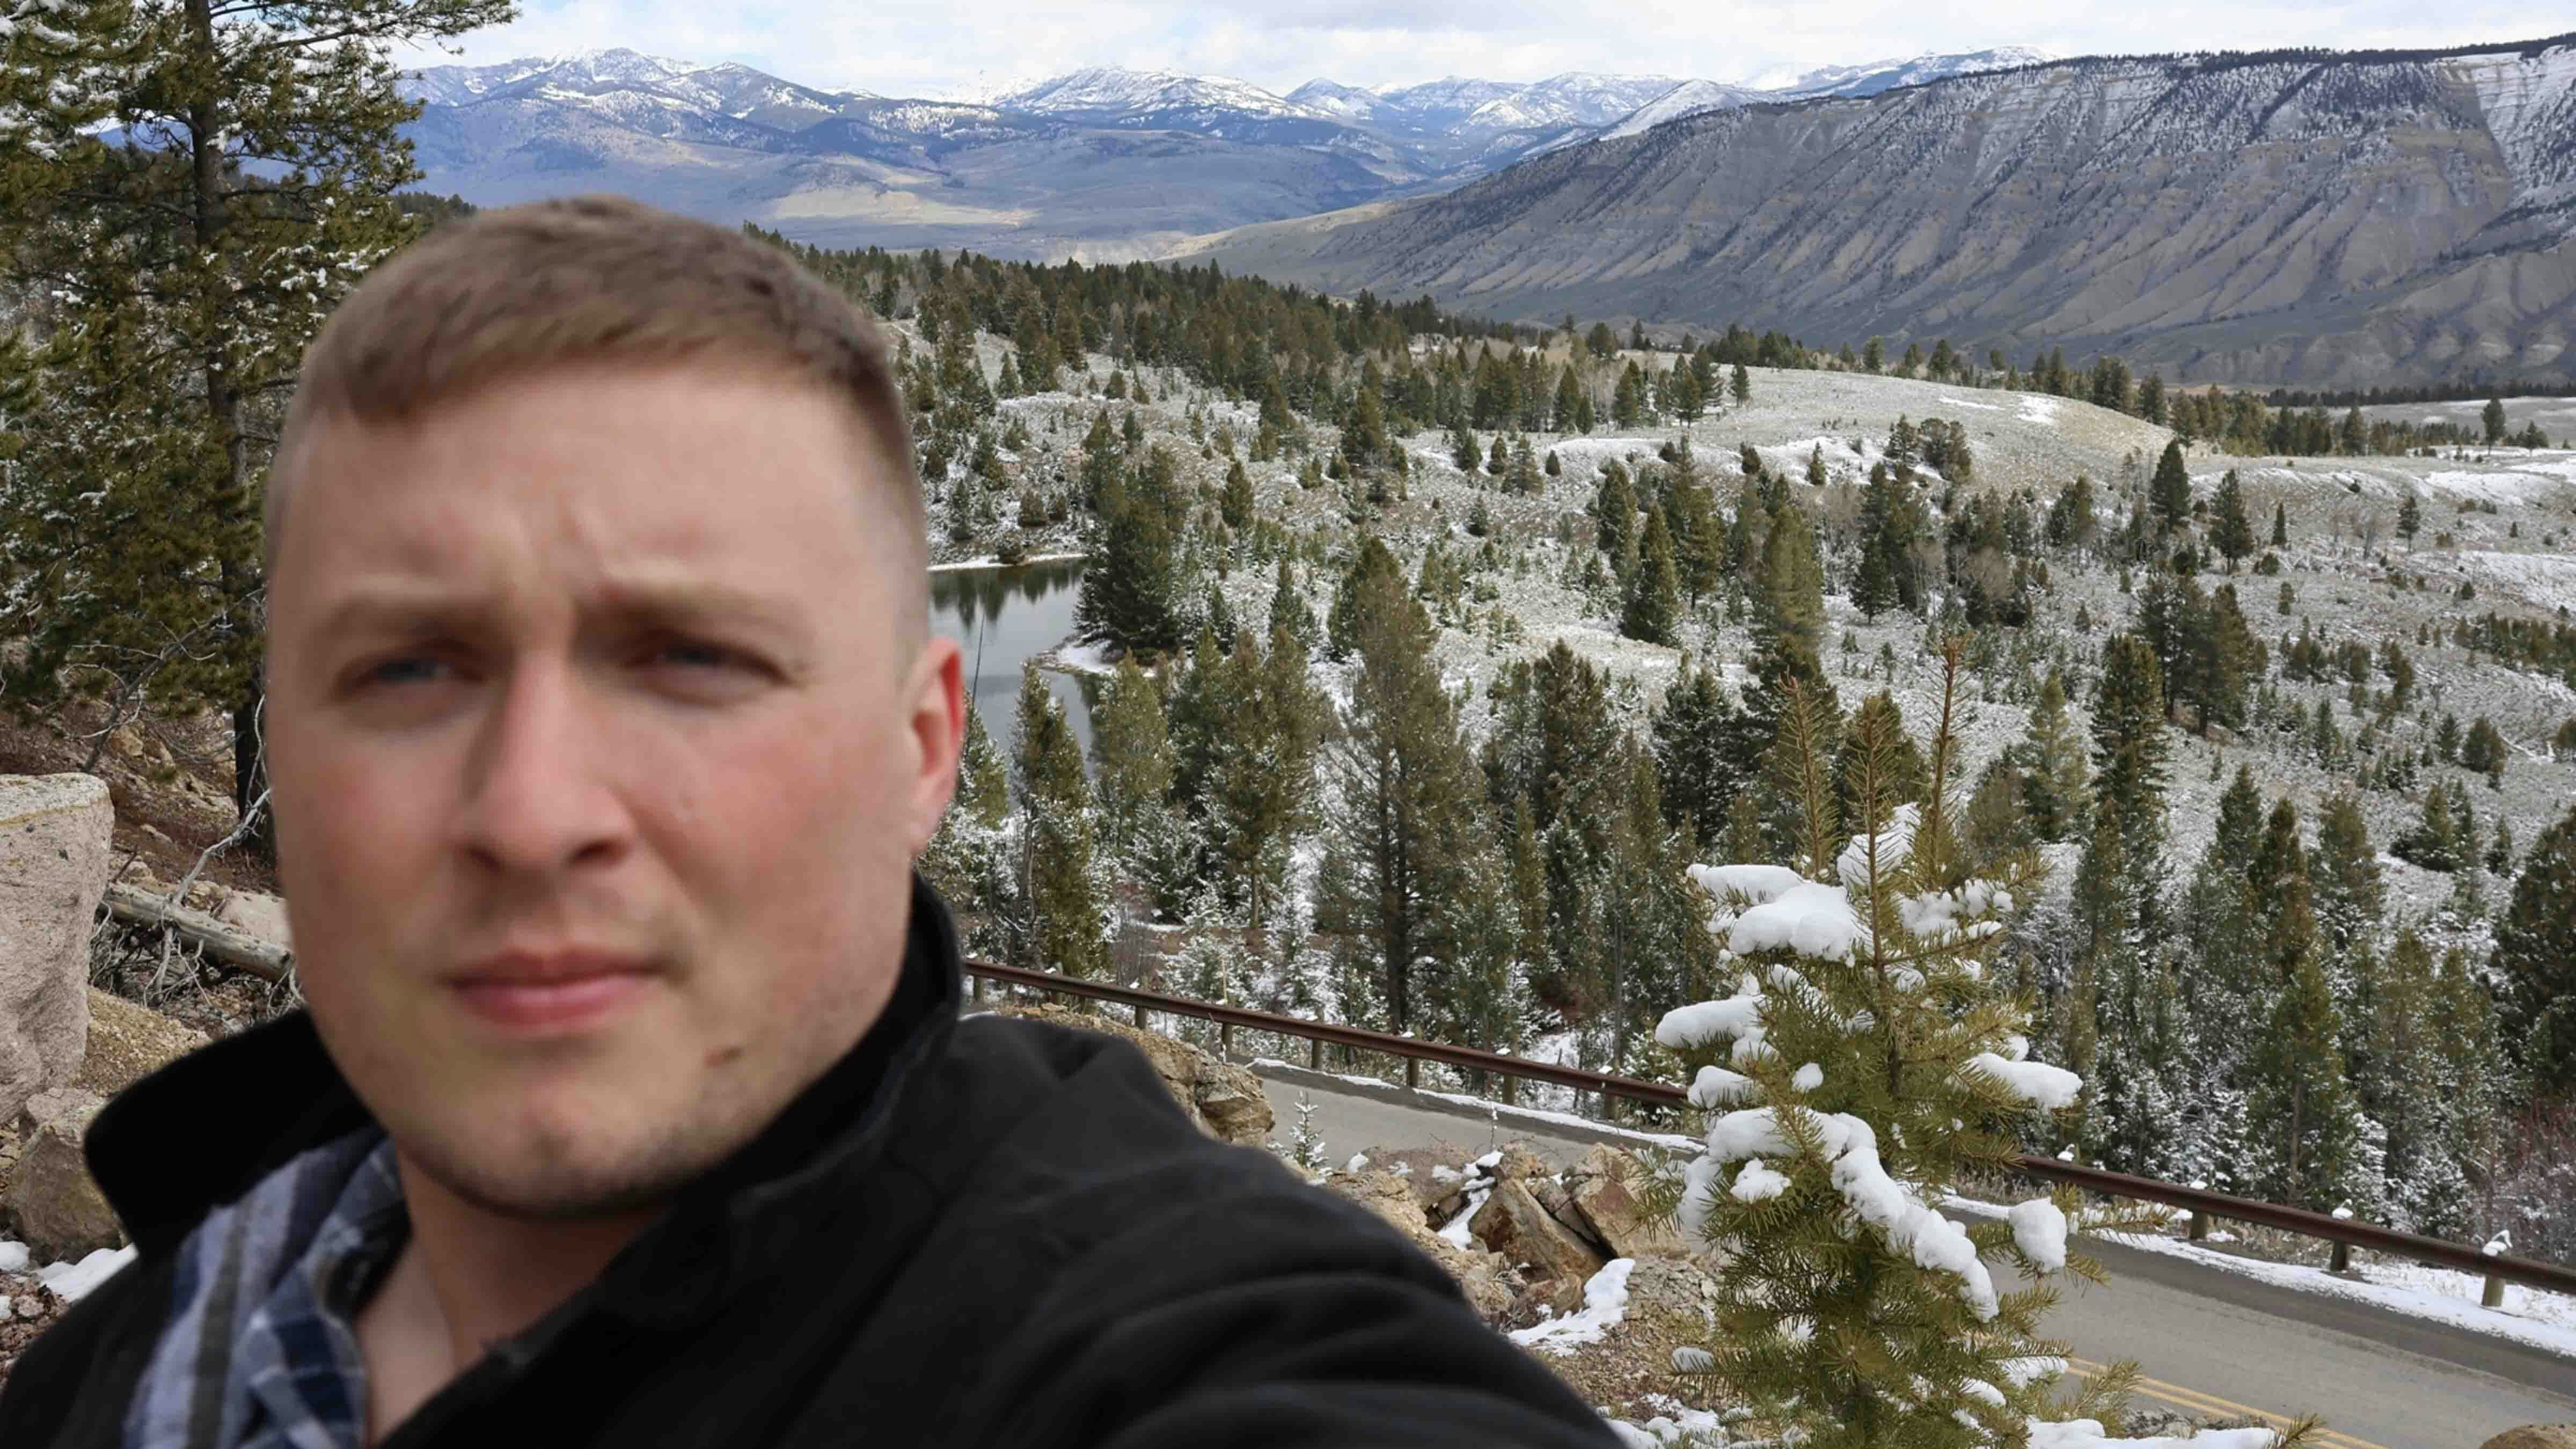 Lucas Fussner in a selfie with mountains, posted to his Facebook page this spring.